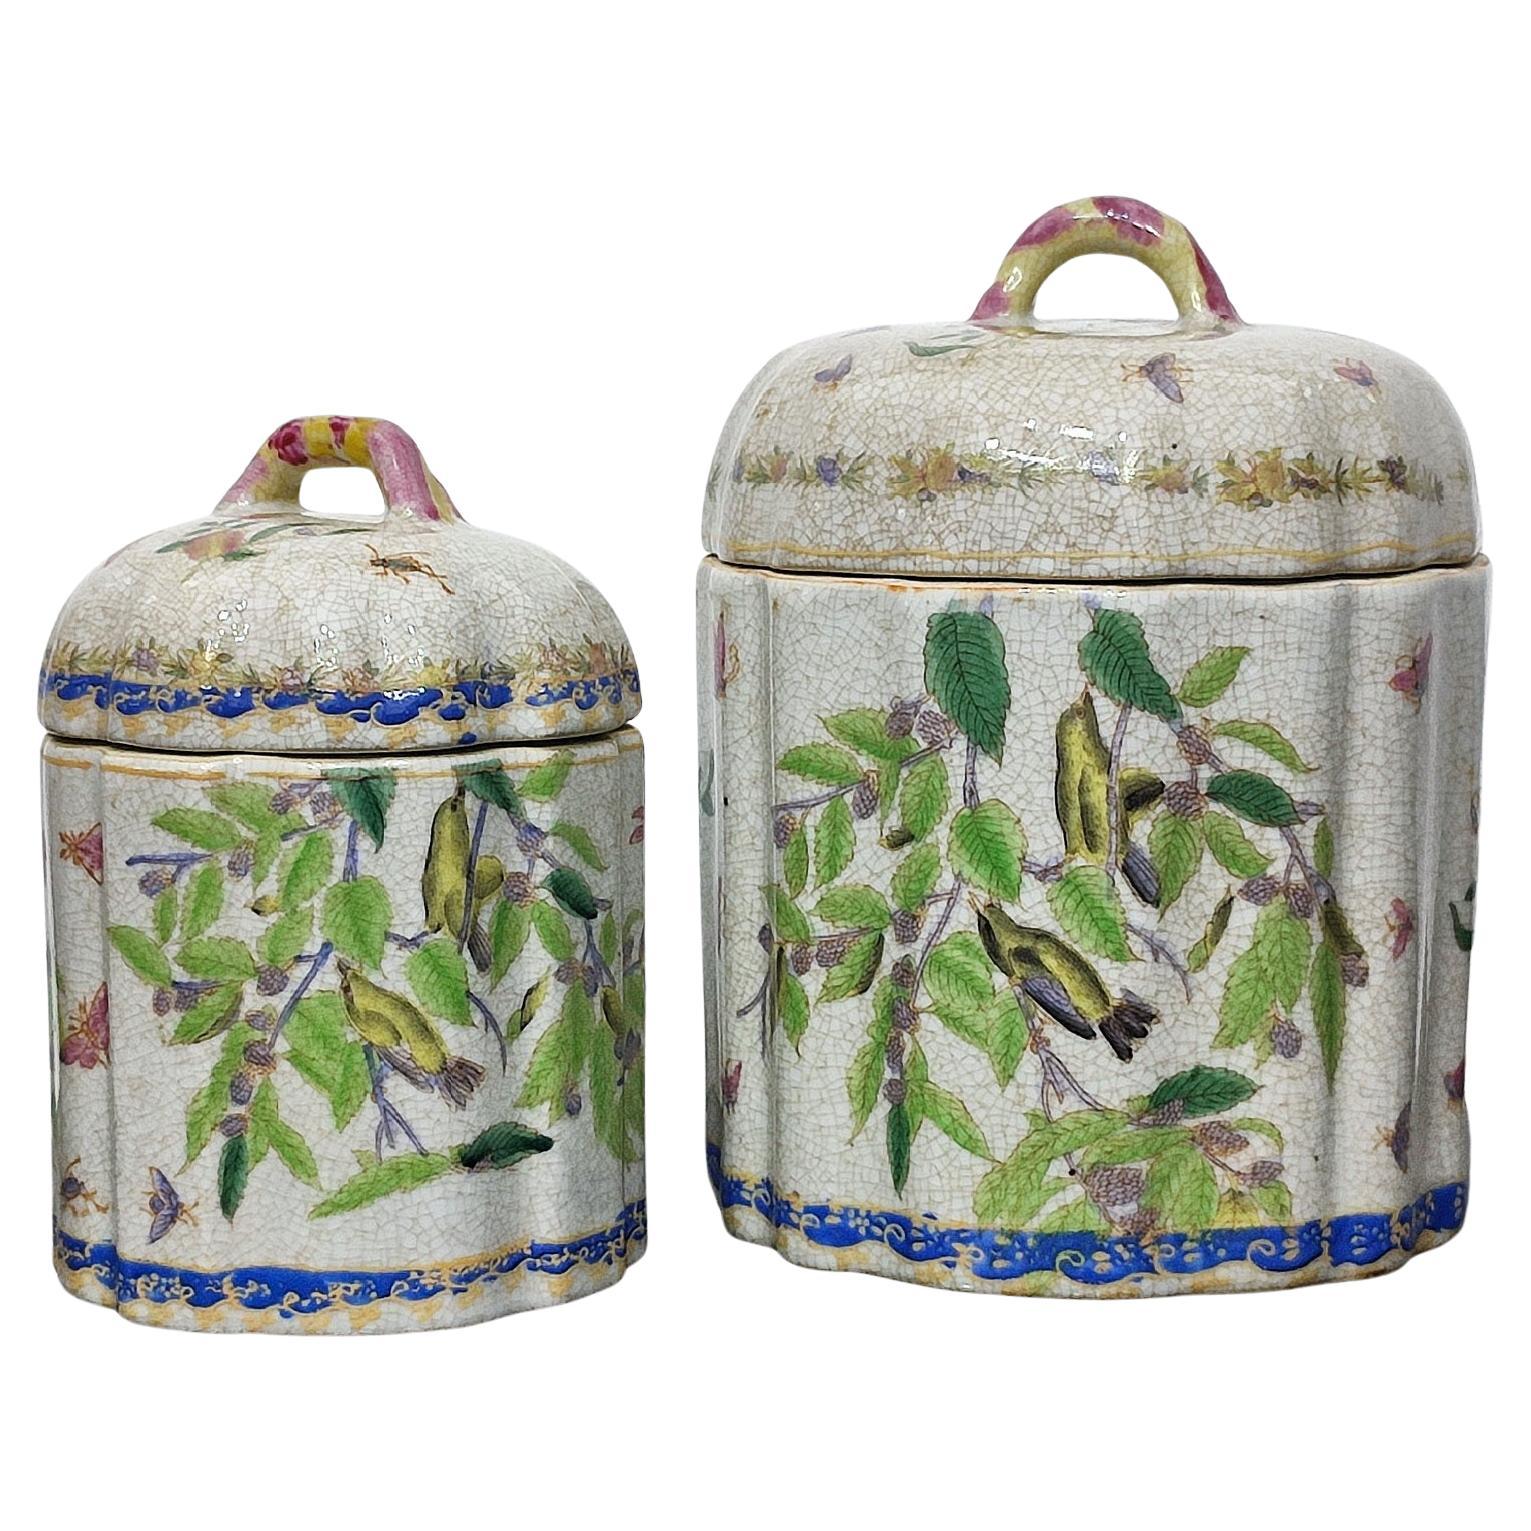 Pair of Craqueled Ceramic Lidded Jars, Vintage from the 1990s - FREE SHIPPING